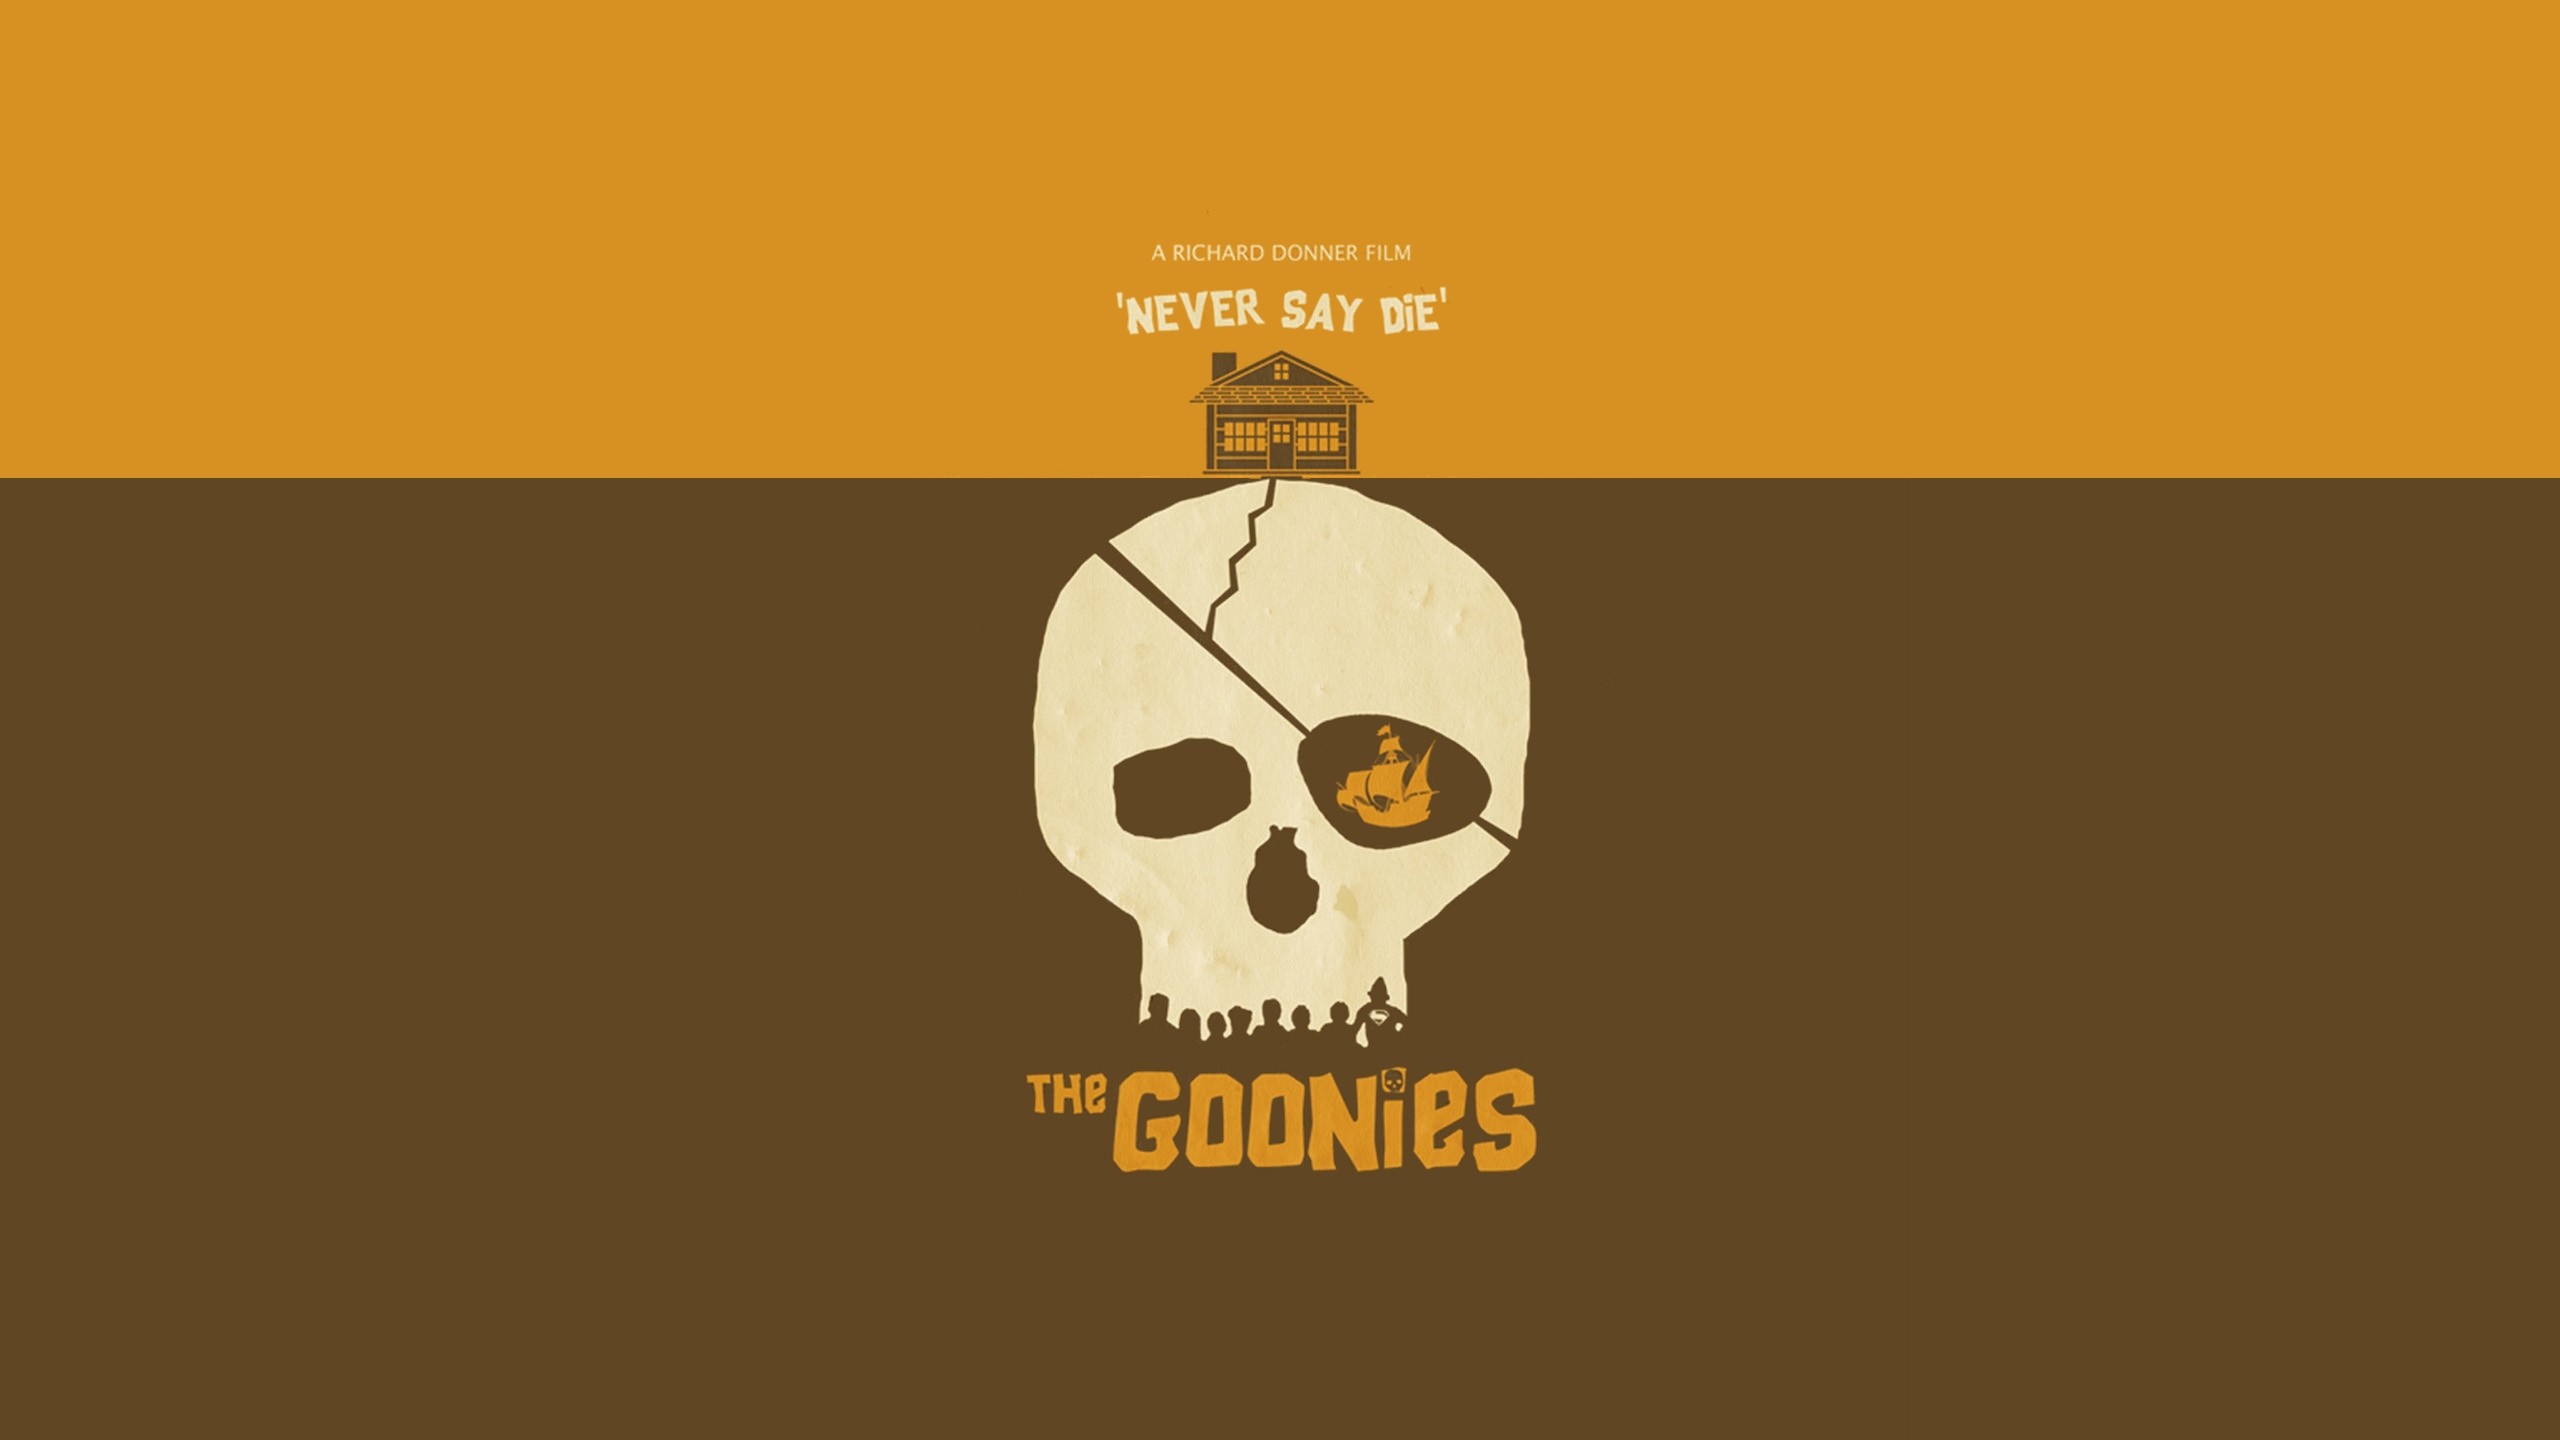 2560x1440 The Goonies Movie Poster Wallpaper Background 53937